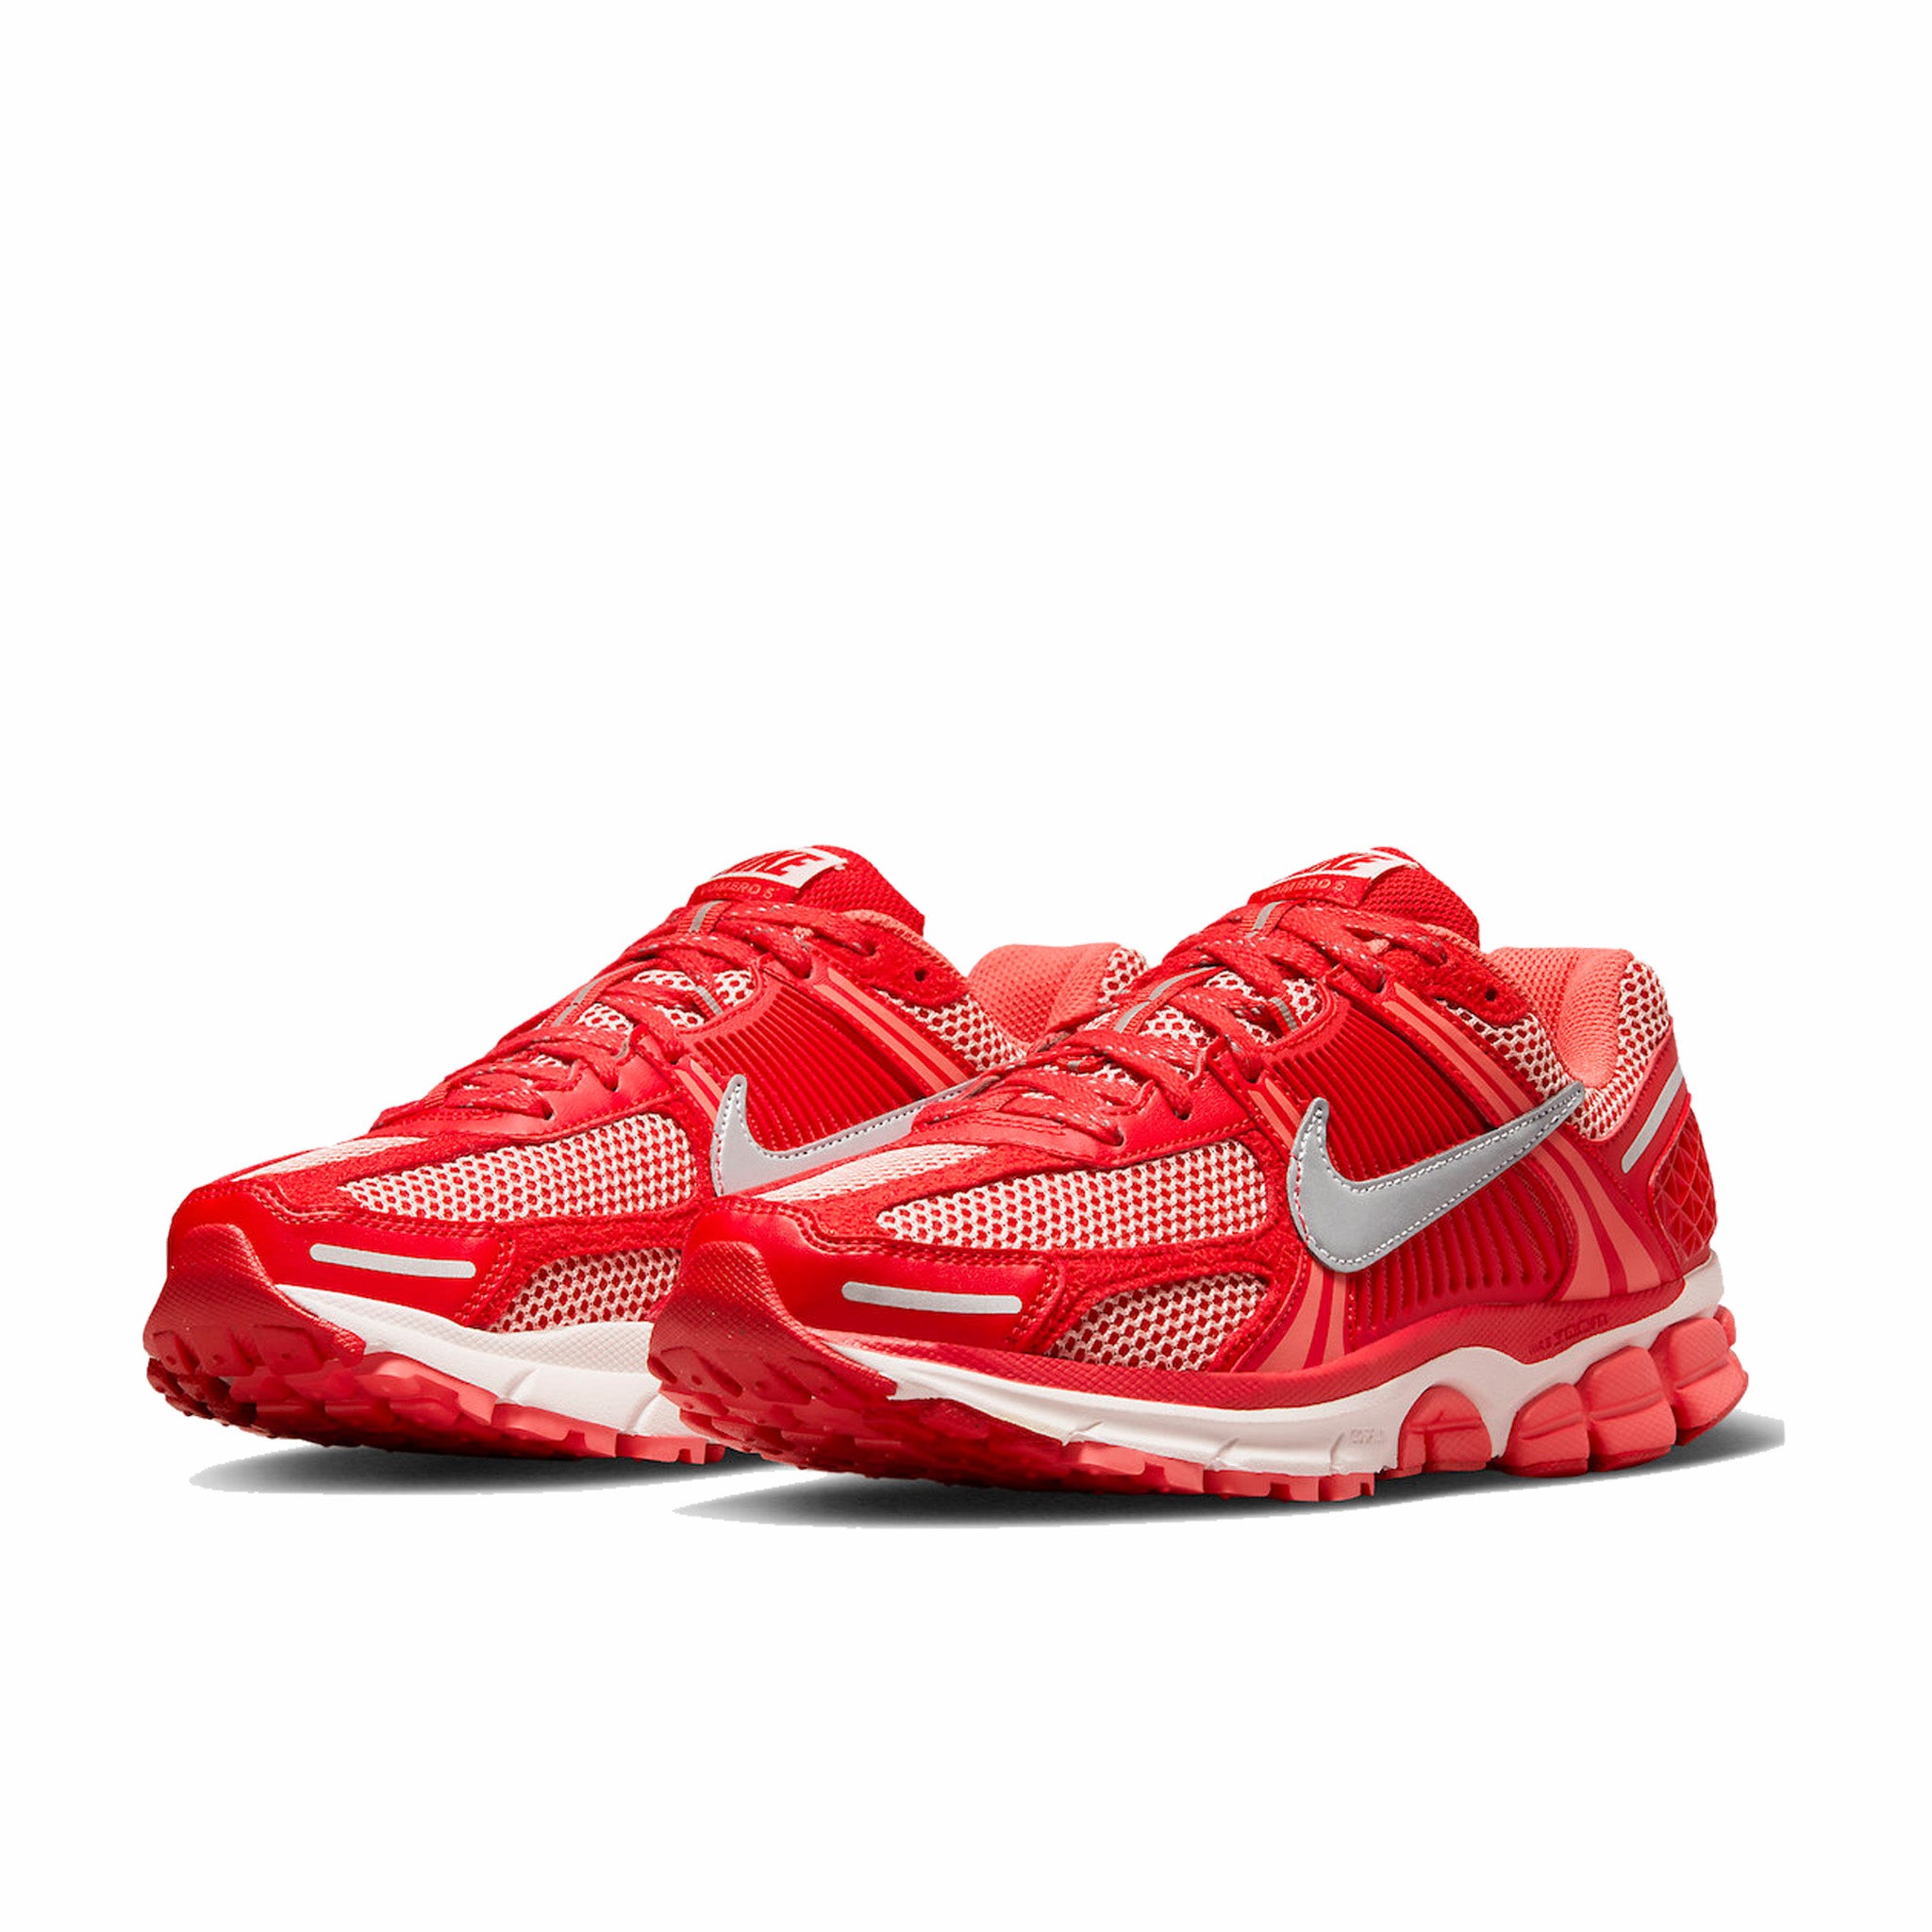 Nike Zoom Vomero 5 “University Red” (University Red/Metallic Silver-Washed Coral-Magic Ember-Summit White) - August Shop